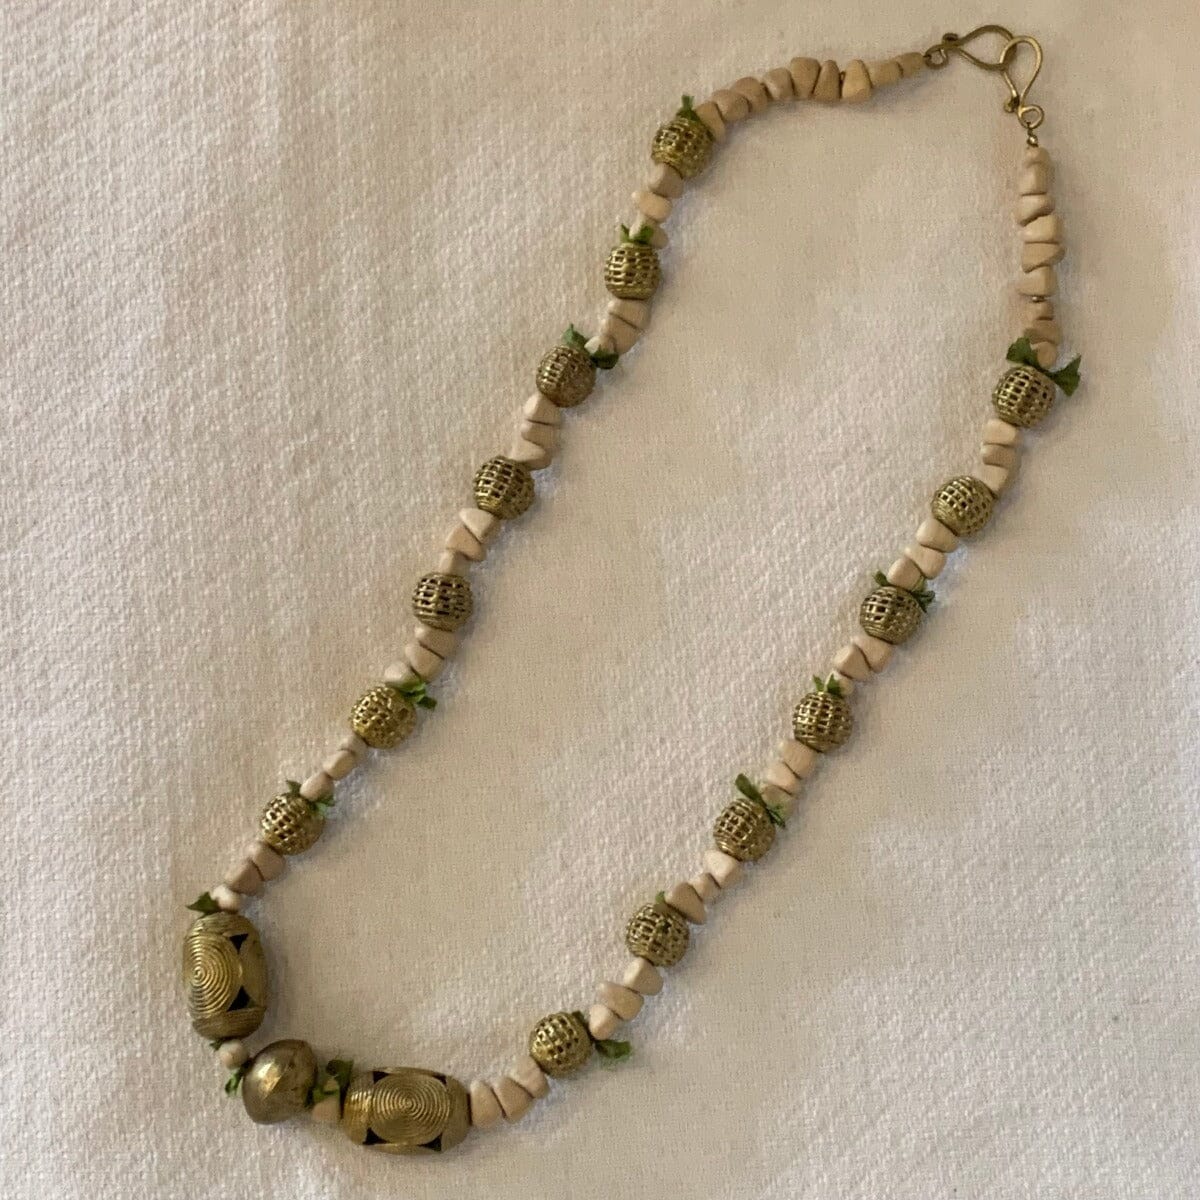 Vintage African Brass and Wooden Beaded Necklace with Green Cloth Spacers Necklace B. Viz Design 